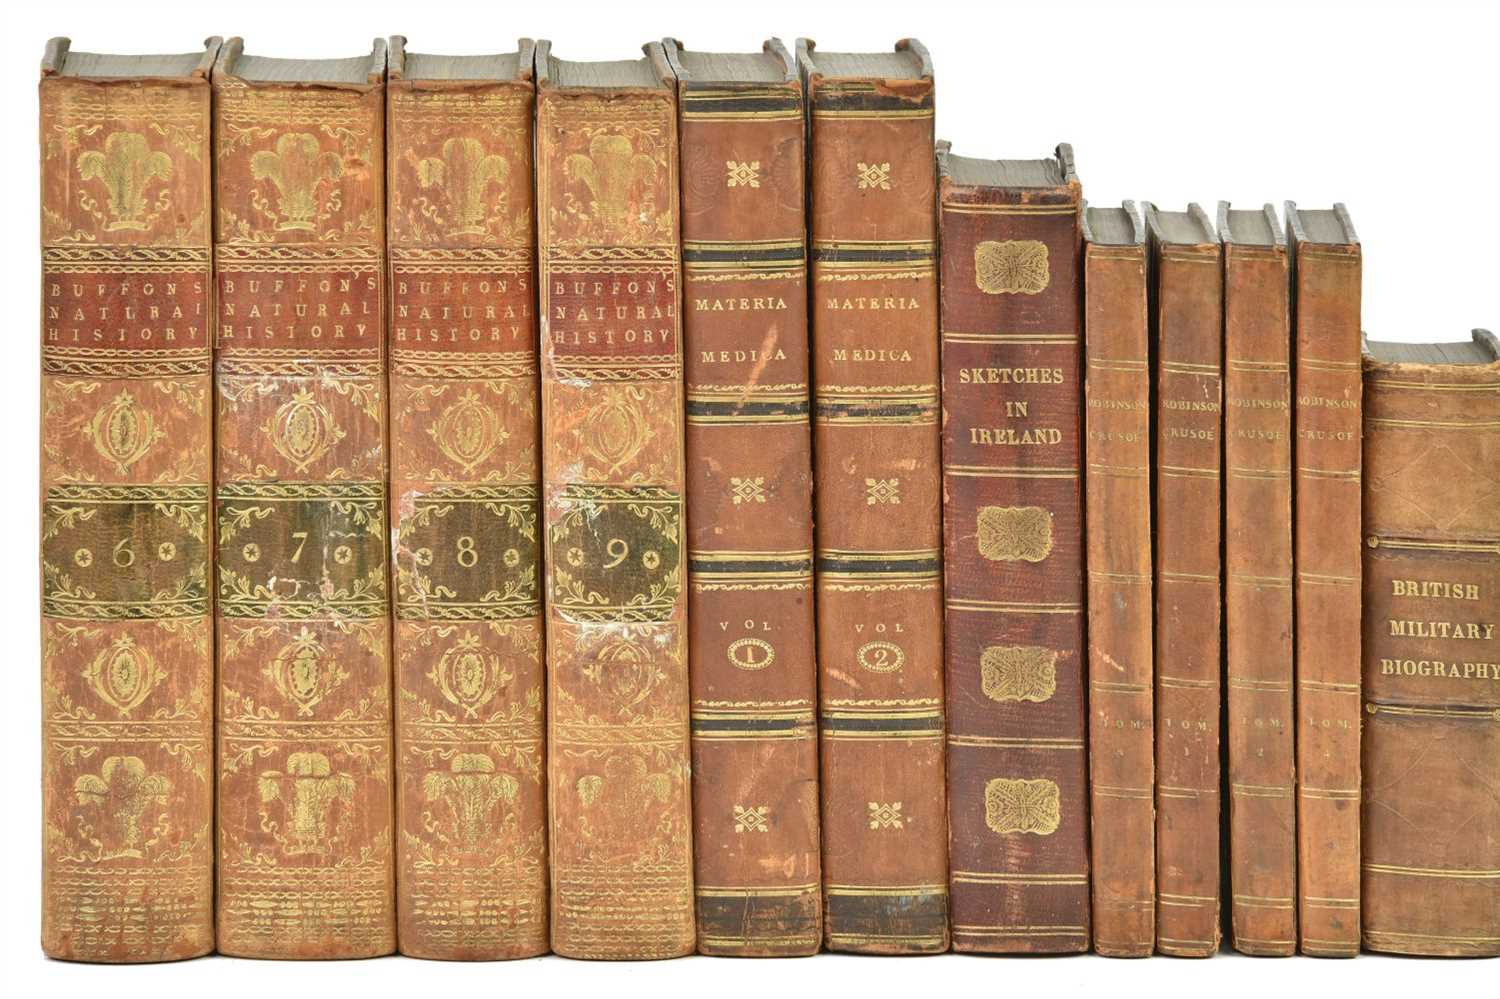 Lot 330 - Buffon (Georges Louis Leclerc, comte de). Natural History, 9 volumes, 1791 [and others]